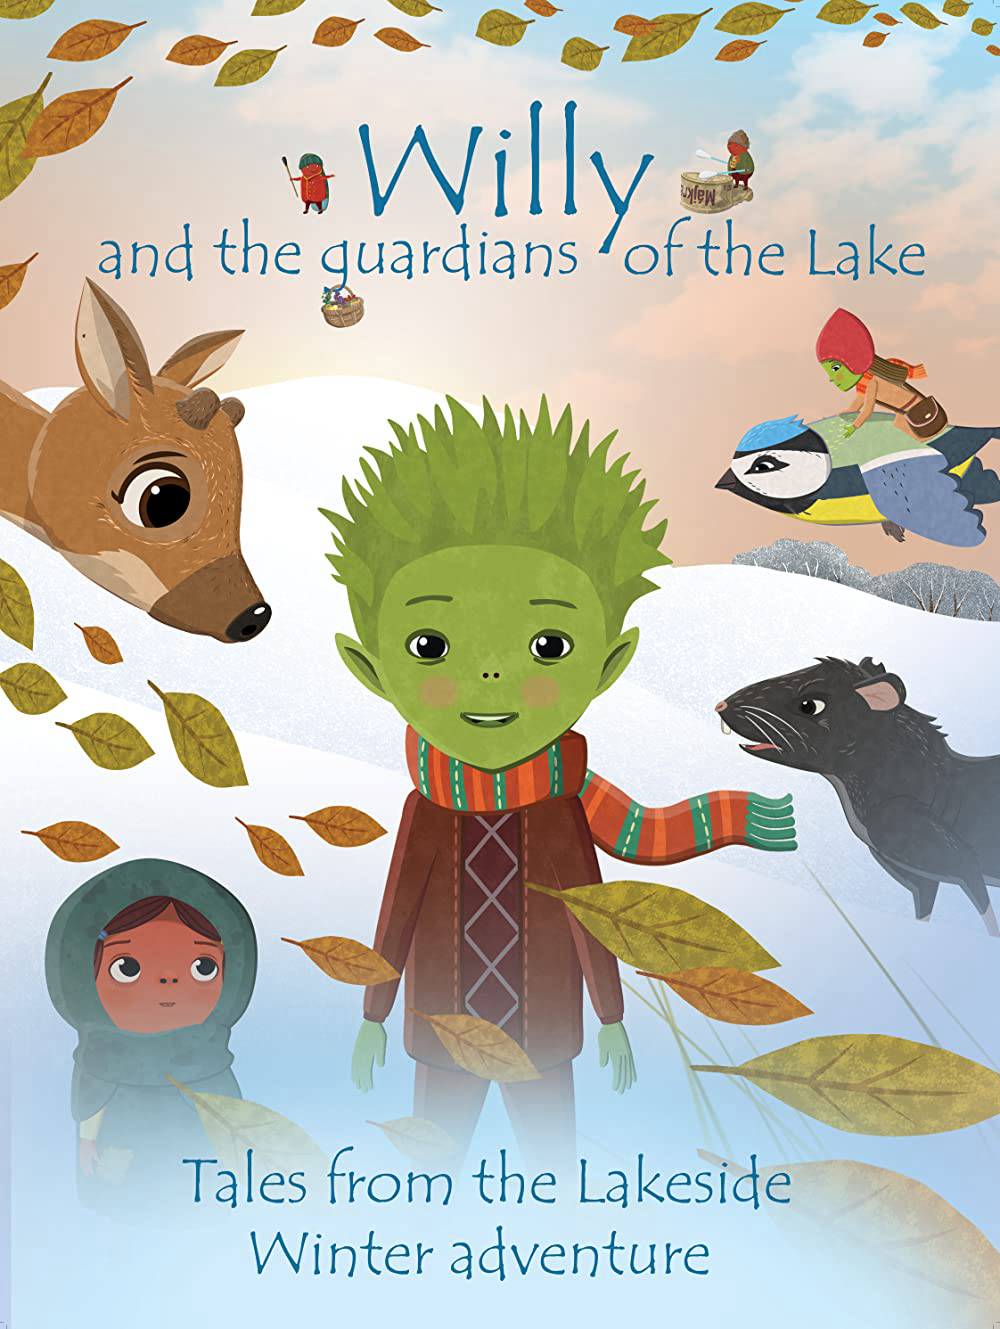 Poster Phim Willy và các vệ sĩ ven hồ (Willy and the Guardians of the Lake: Tales from the Lakeside Winter Adventure)